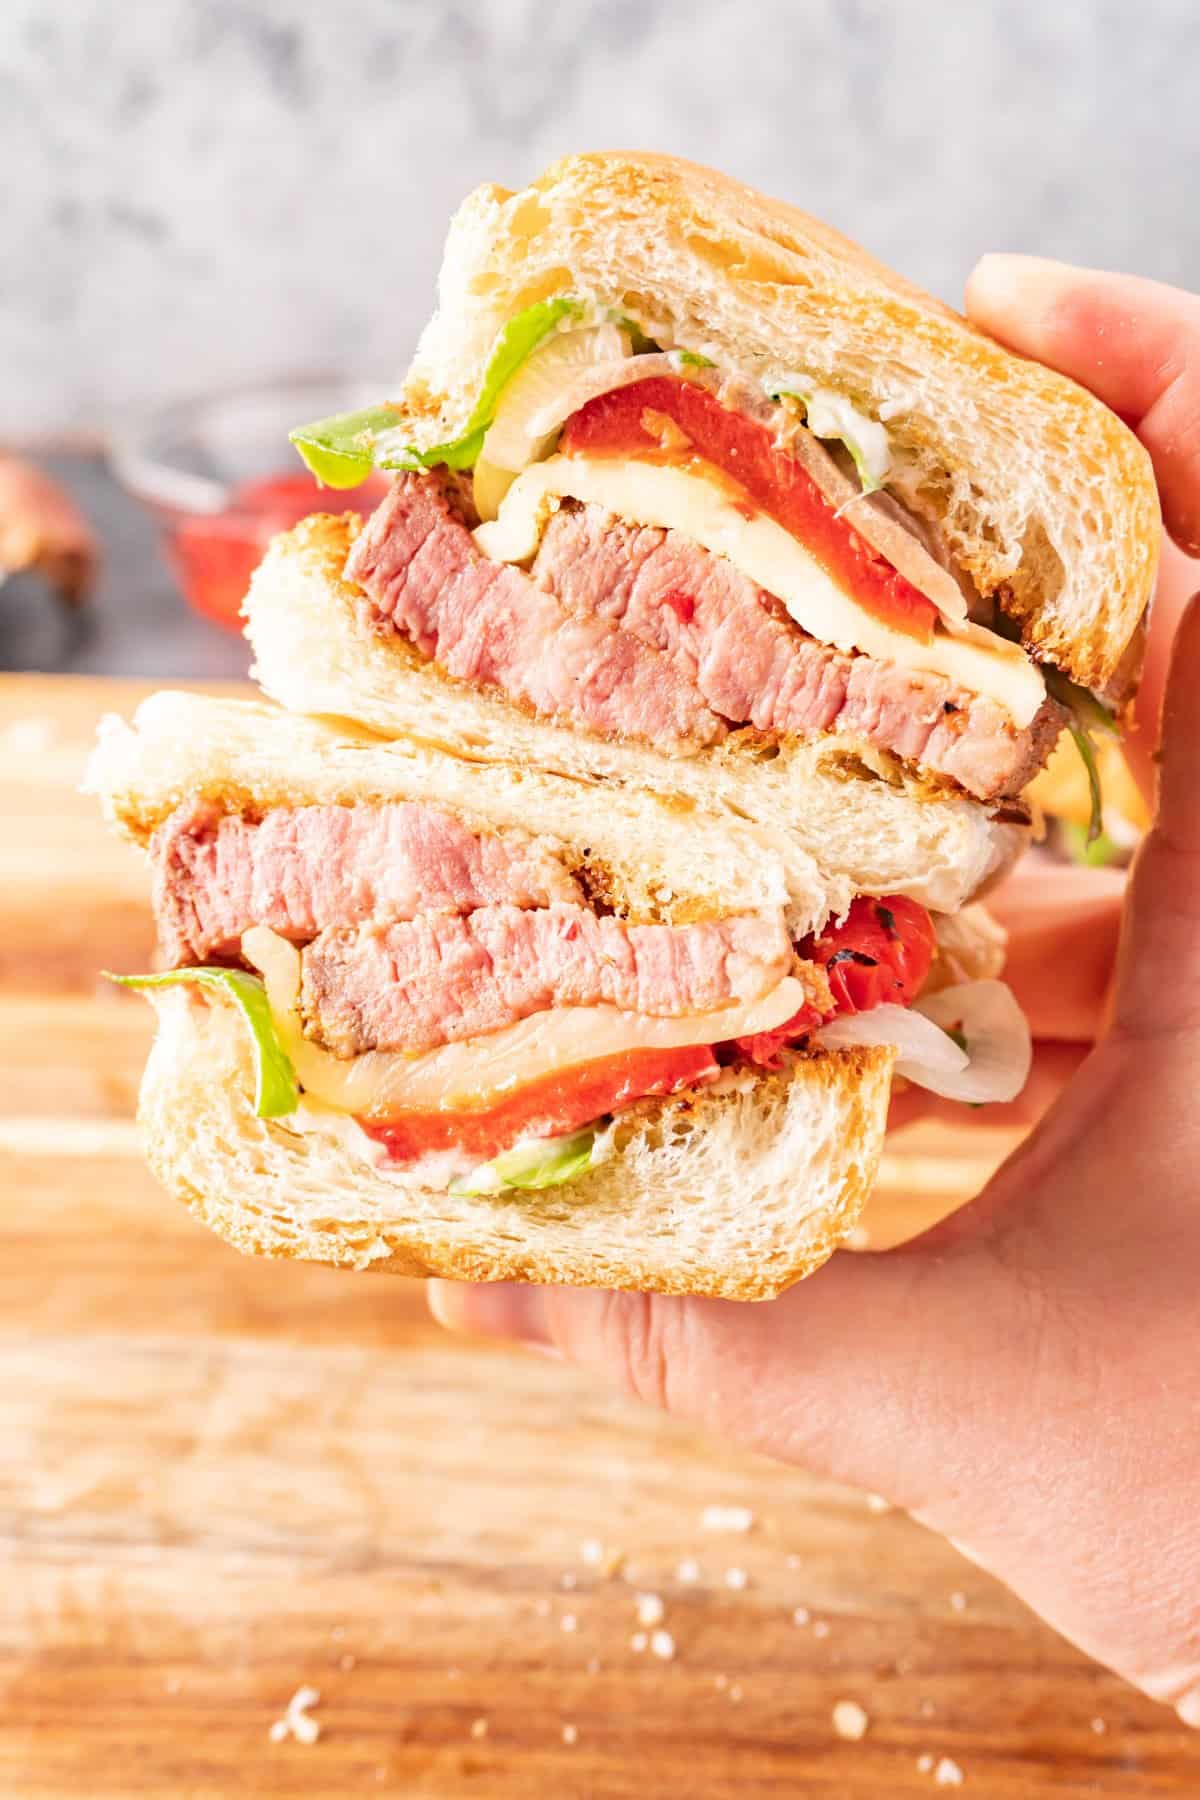 tri tip sandwich being held in had and cut in half.